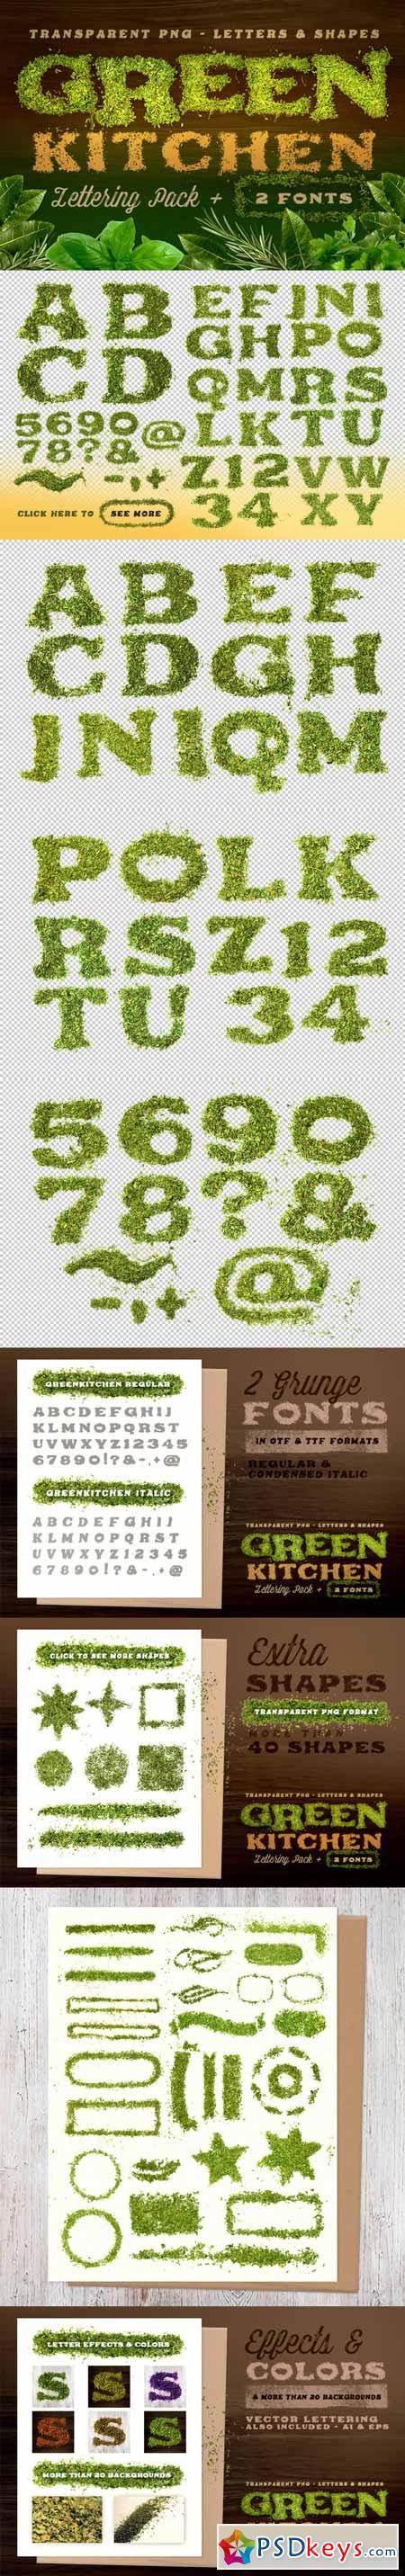 Green Kitchen - Creative Lettering 292021